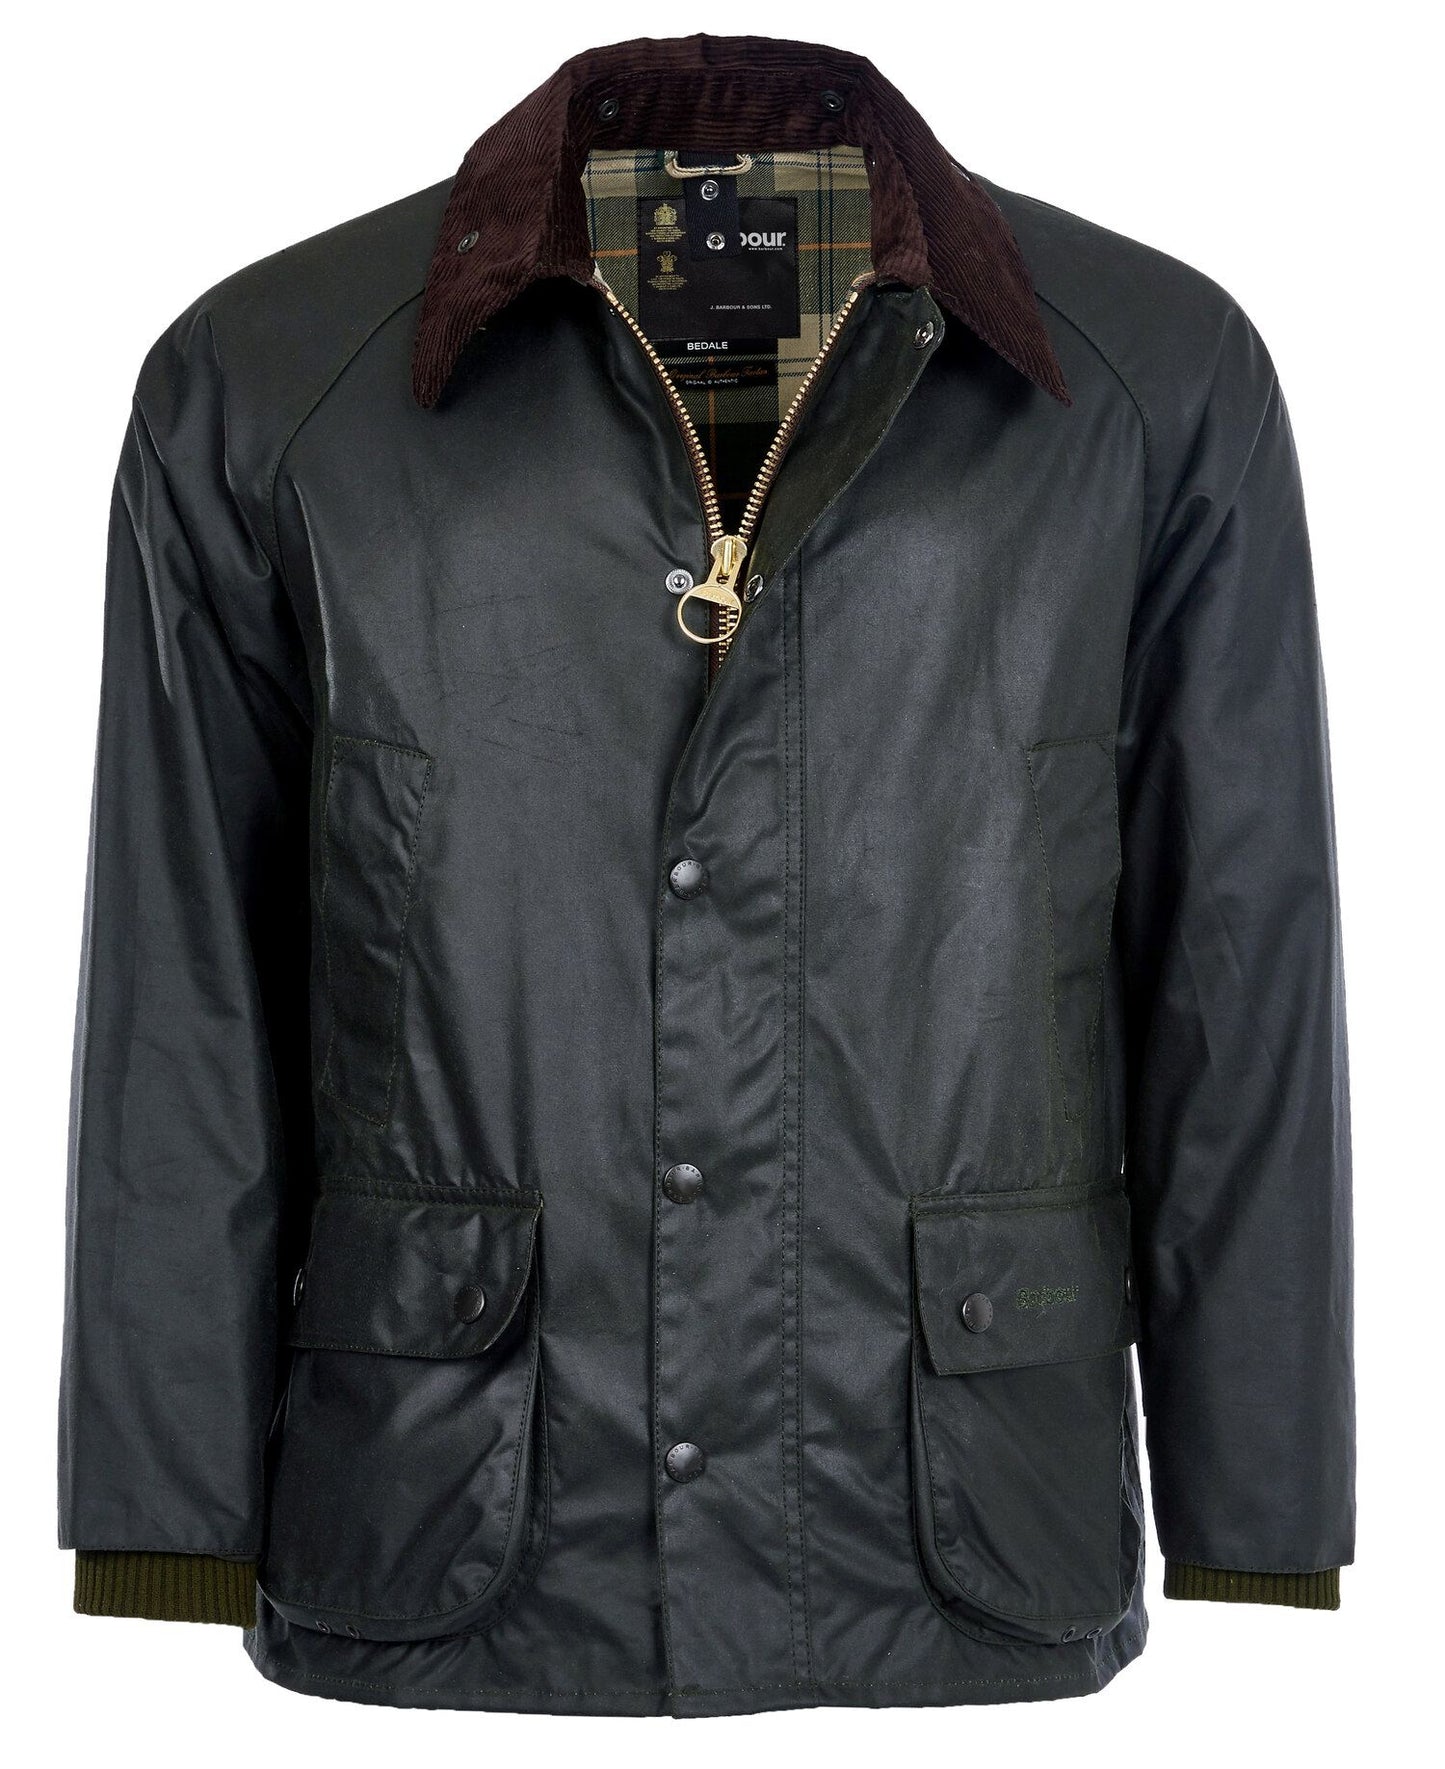 Barbour Waxed Cotton Classic Bedale (4 Colors)